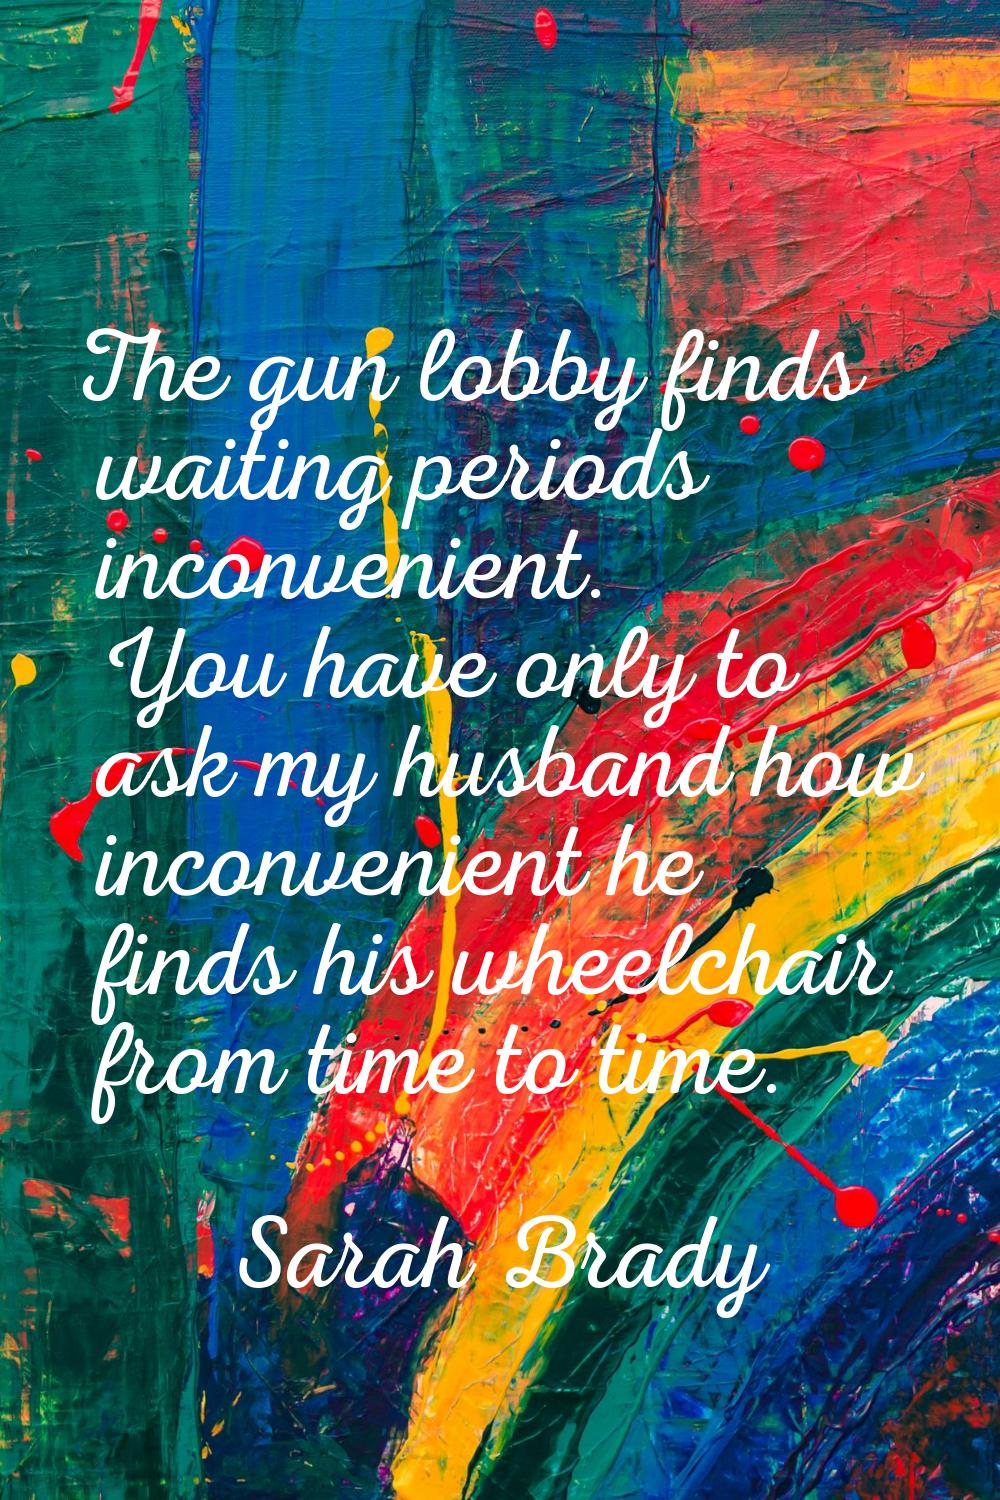 The gun lobby finds waiting periods inconvenient. You have only to ask my husband how inconvenient 